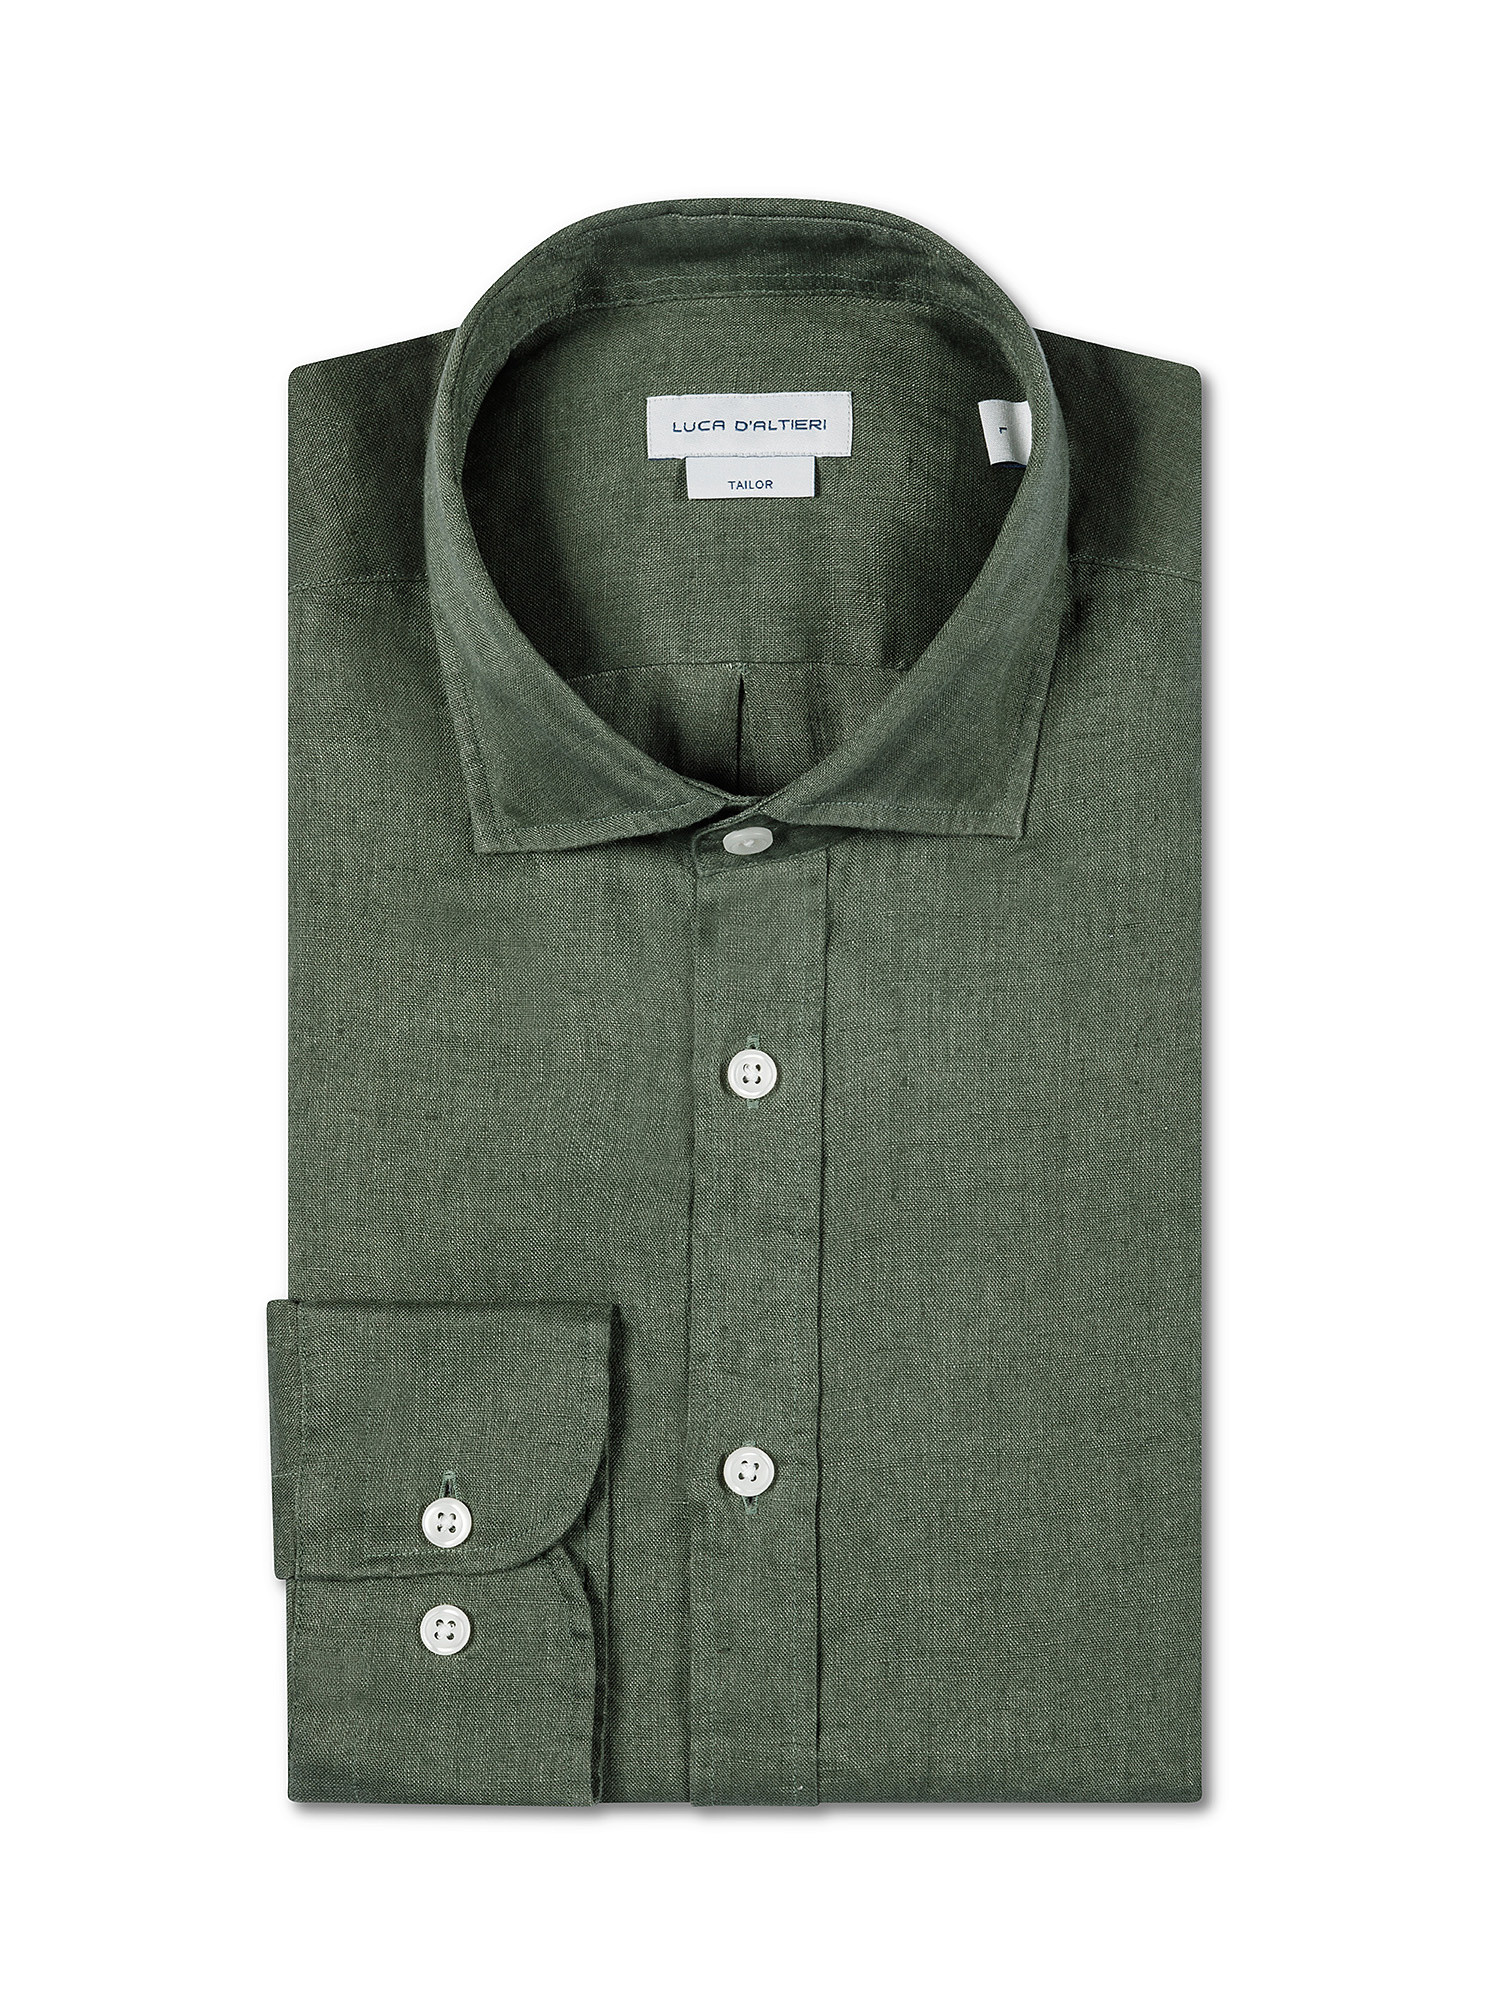 Luca D'Altieri - Tailor fit shirt in pure linen, Green, large image number 2